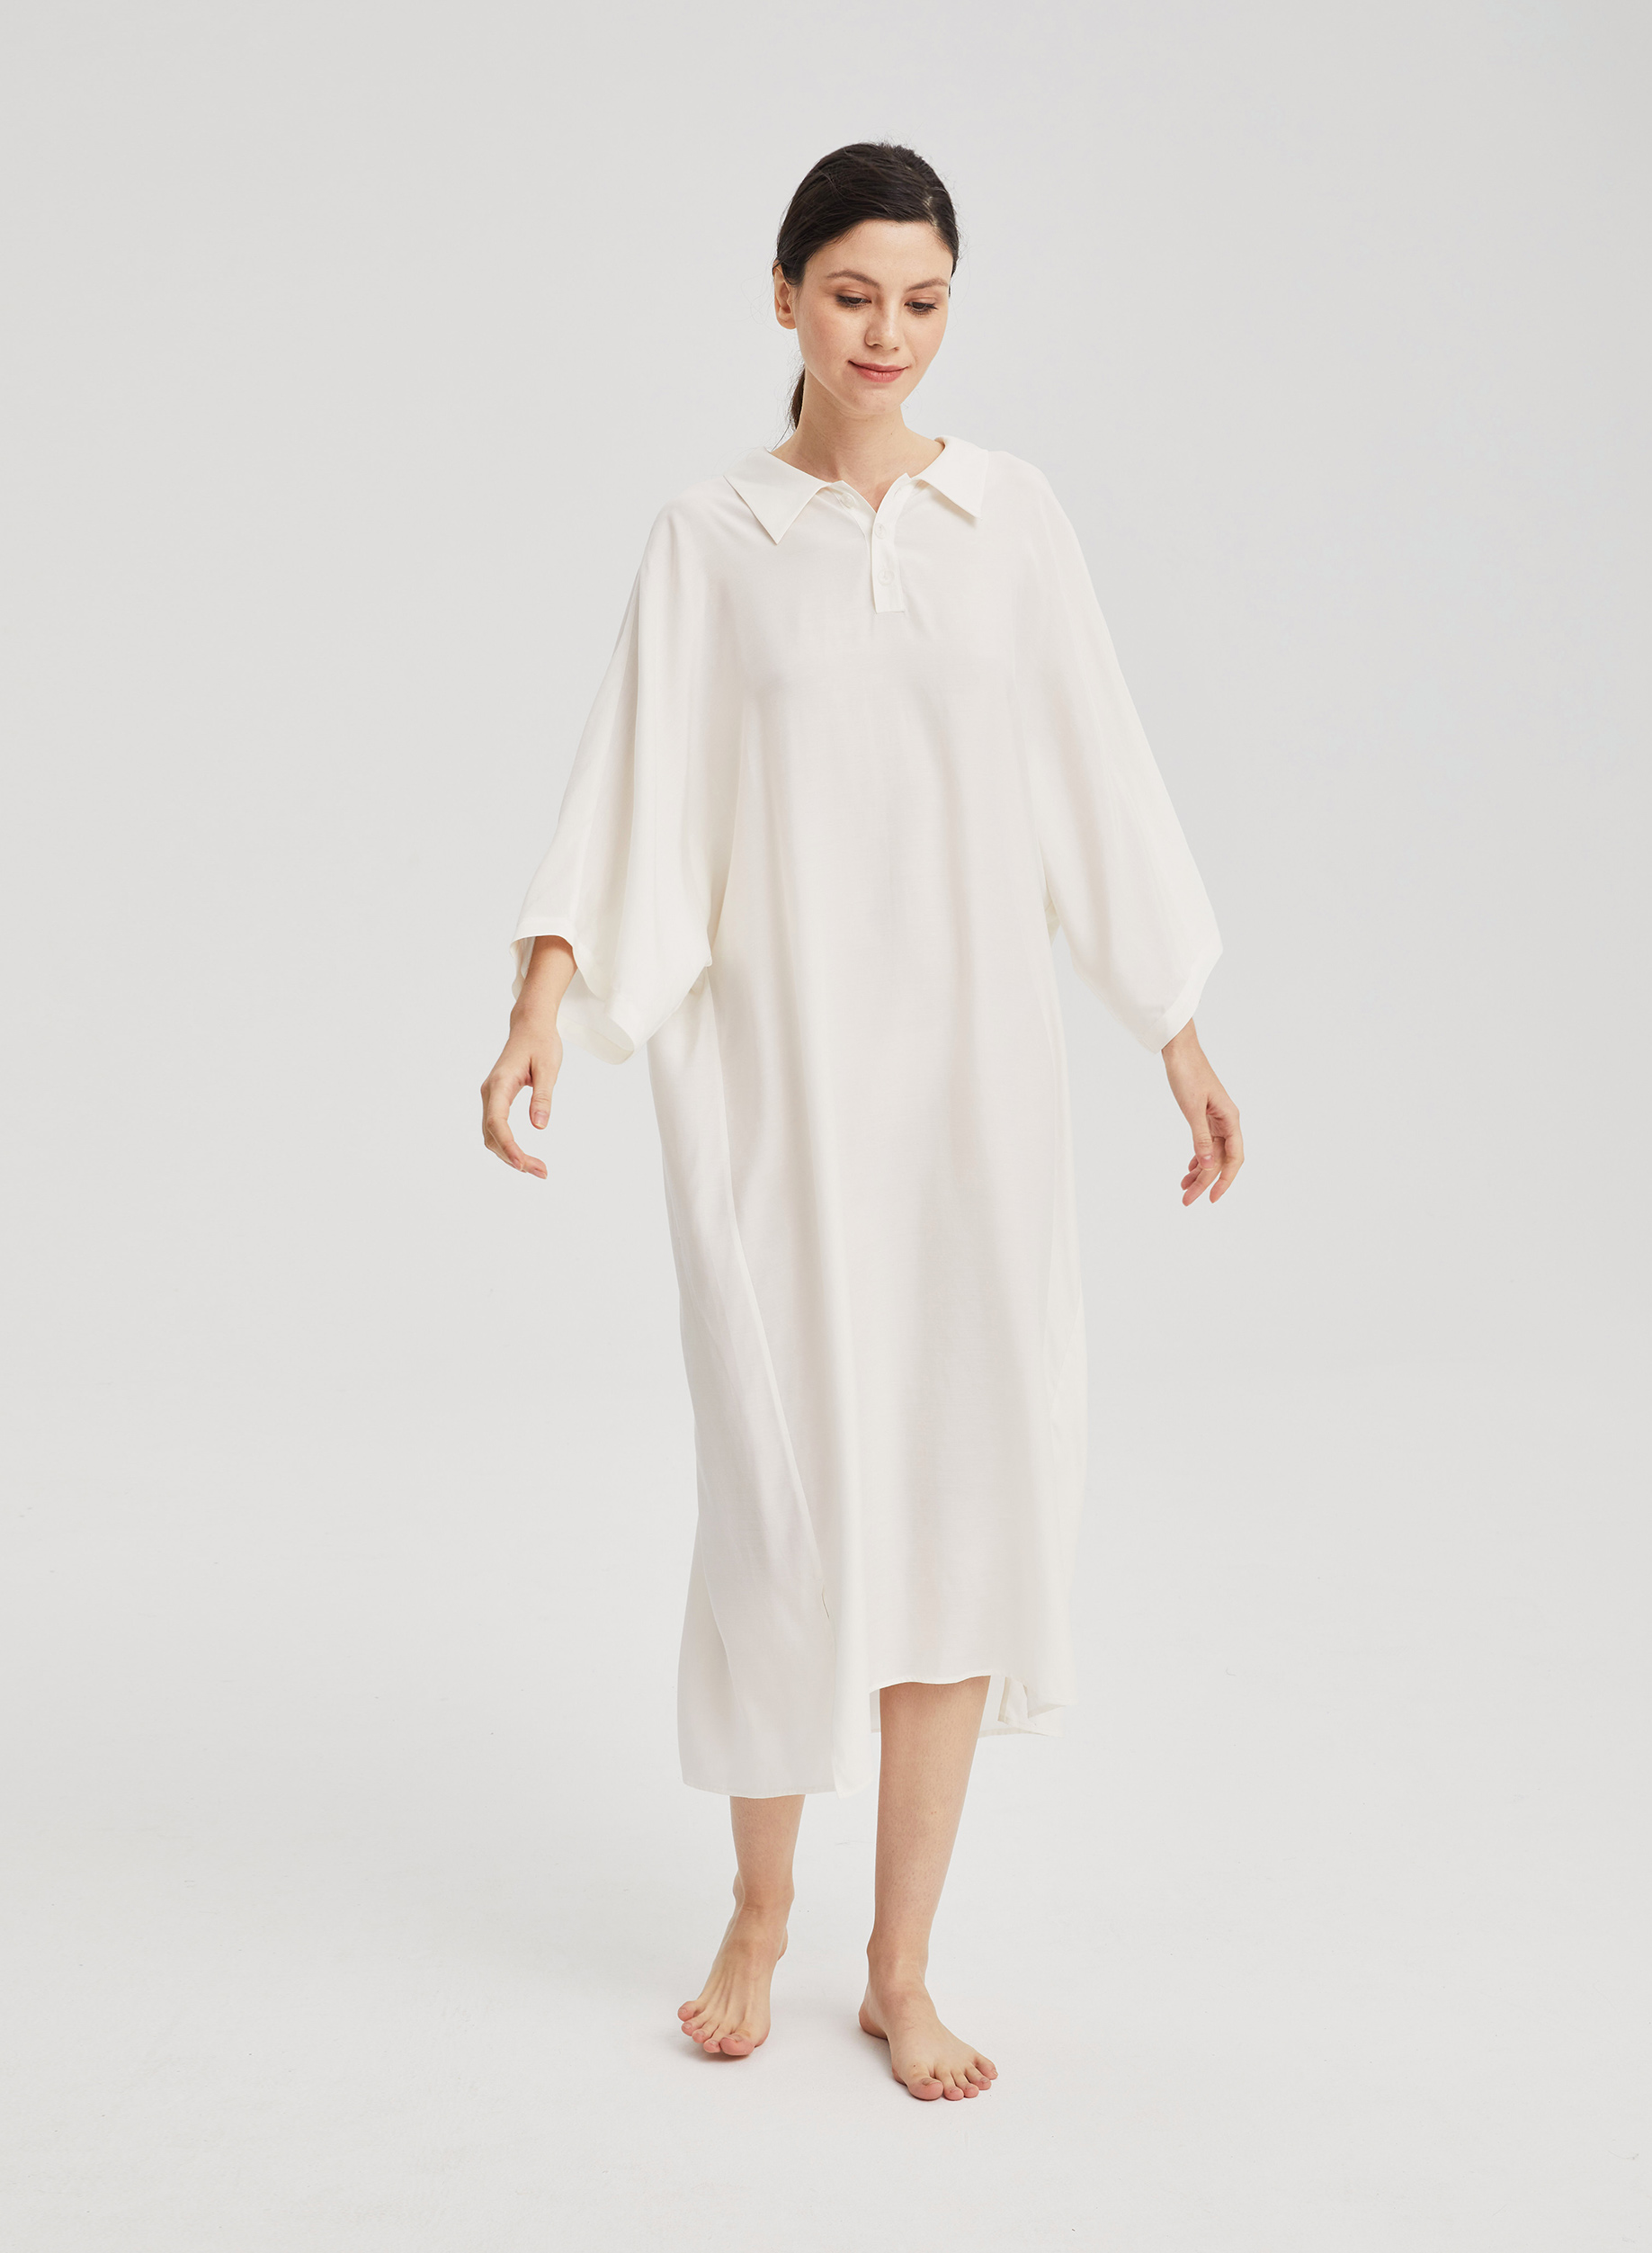 white shift dress with collar